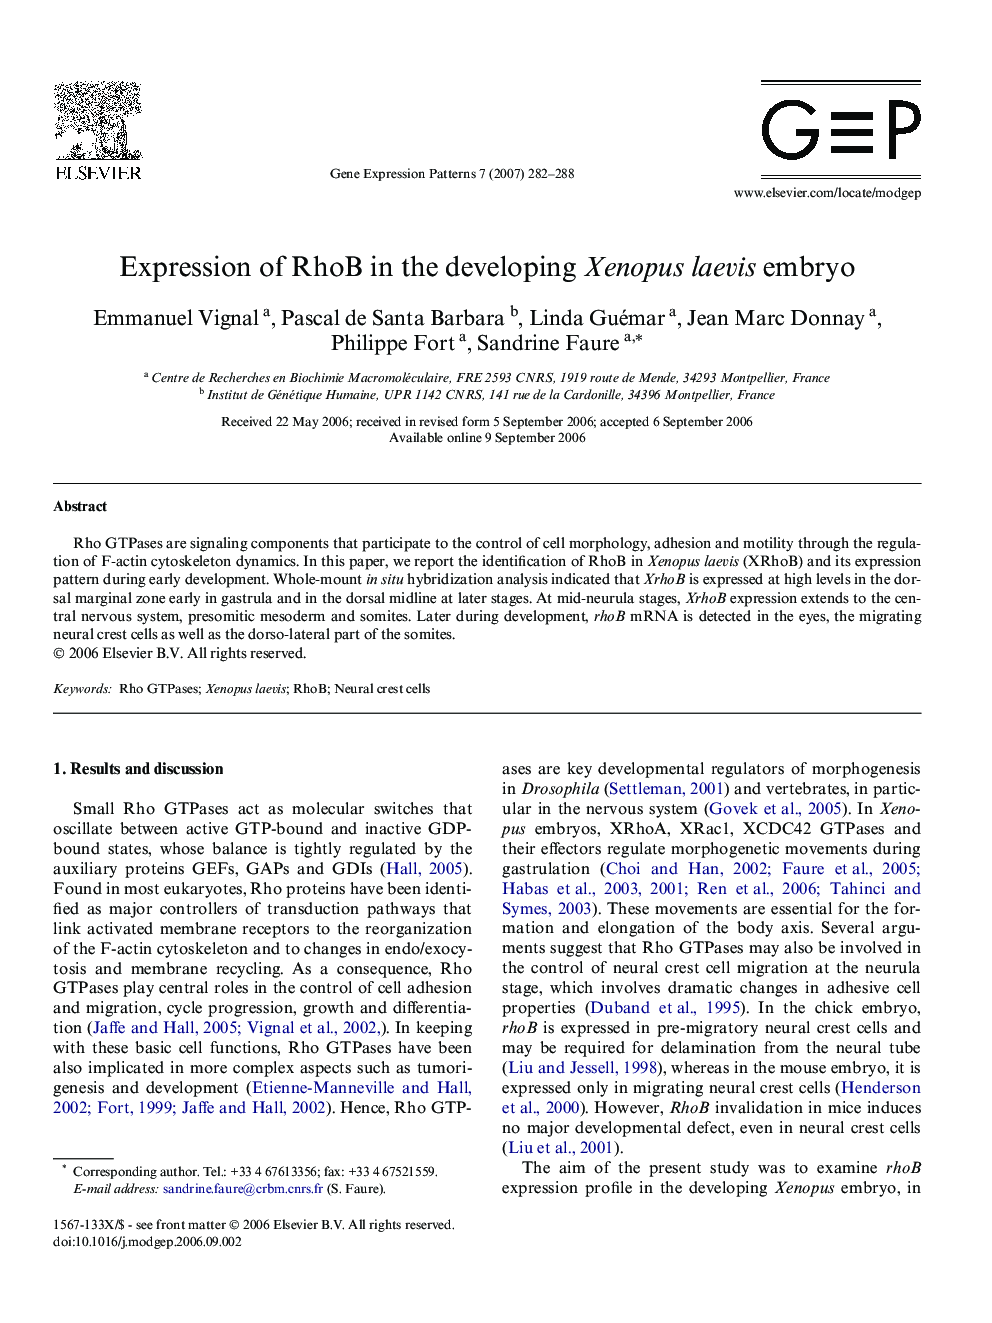 Expression of RhoB in the developing Xenopus laevis embryo